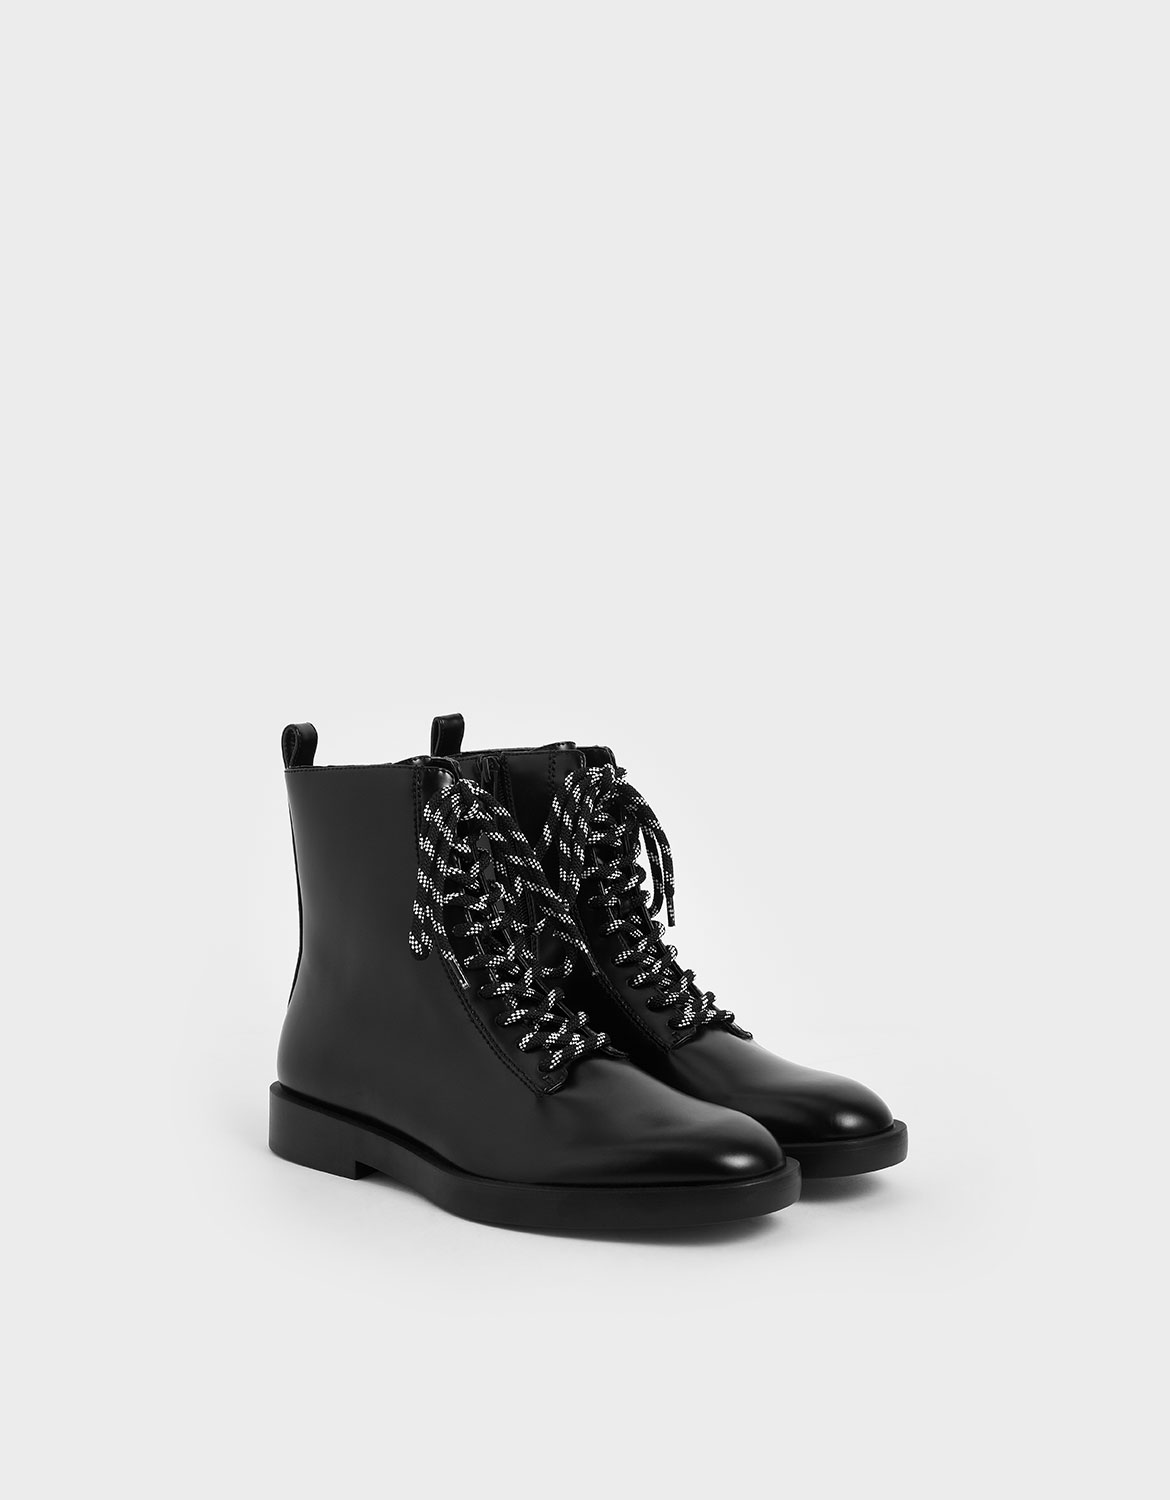 Women’s lace-up ankle boots in black